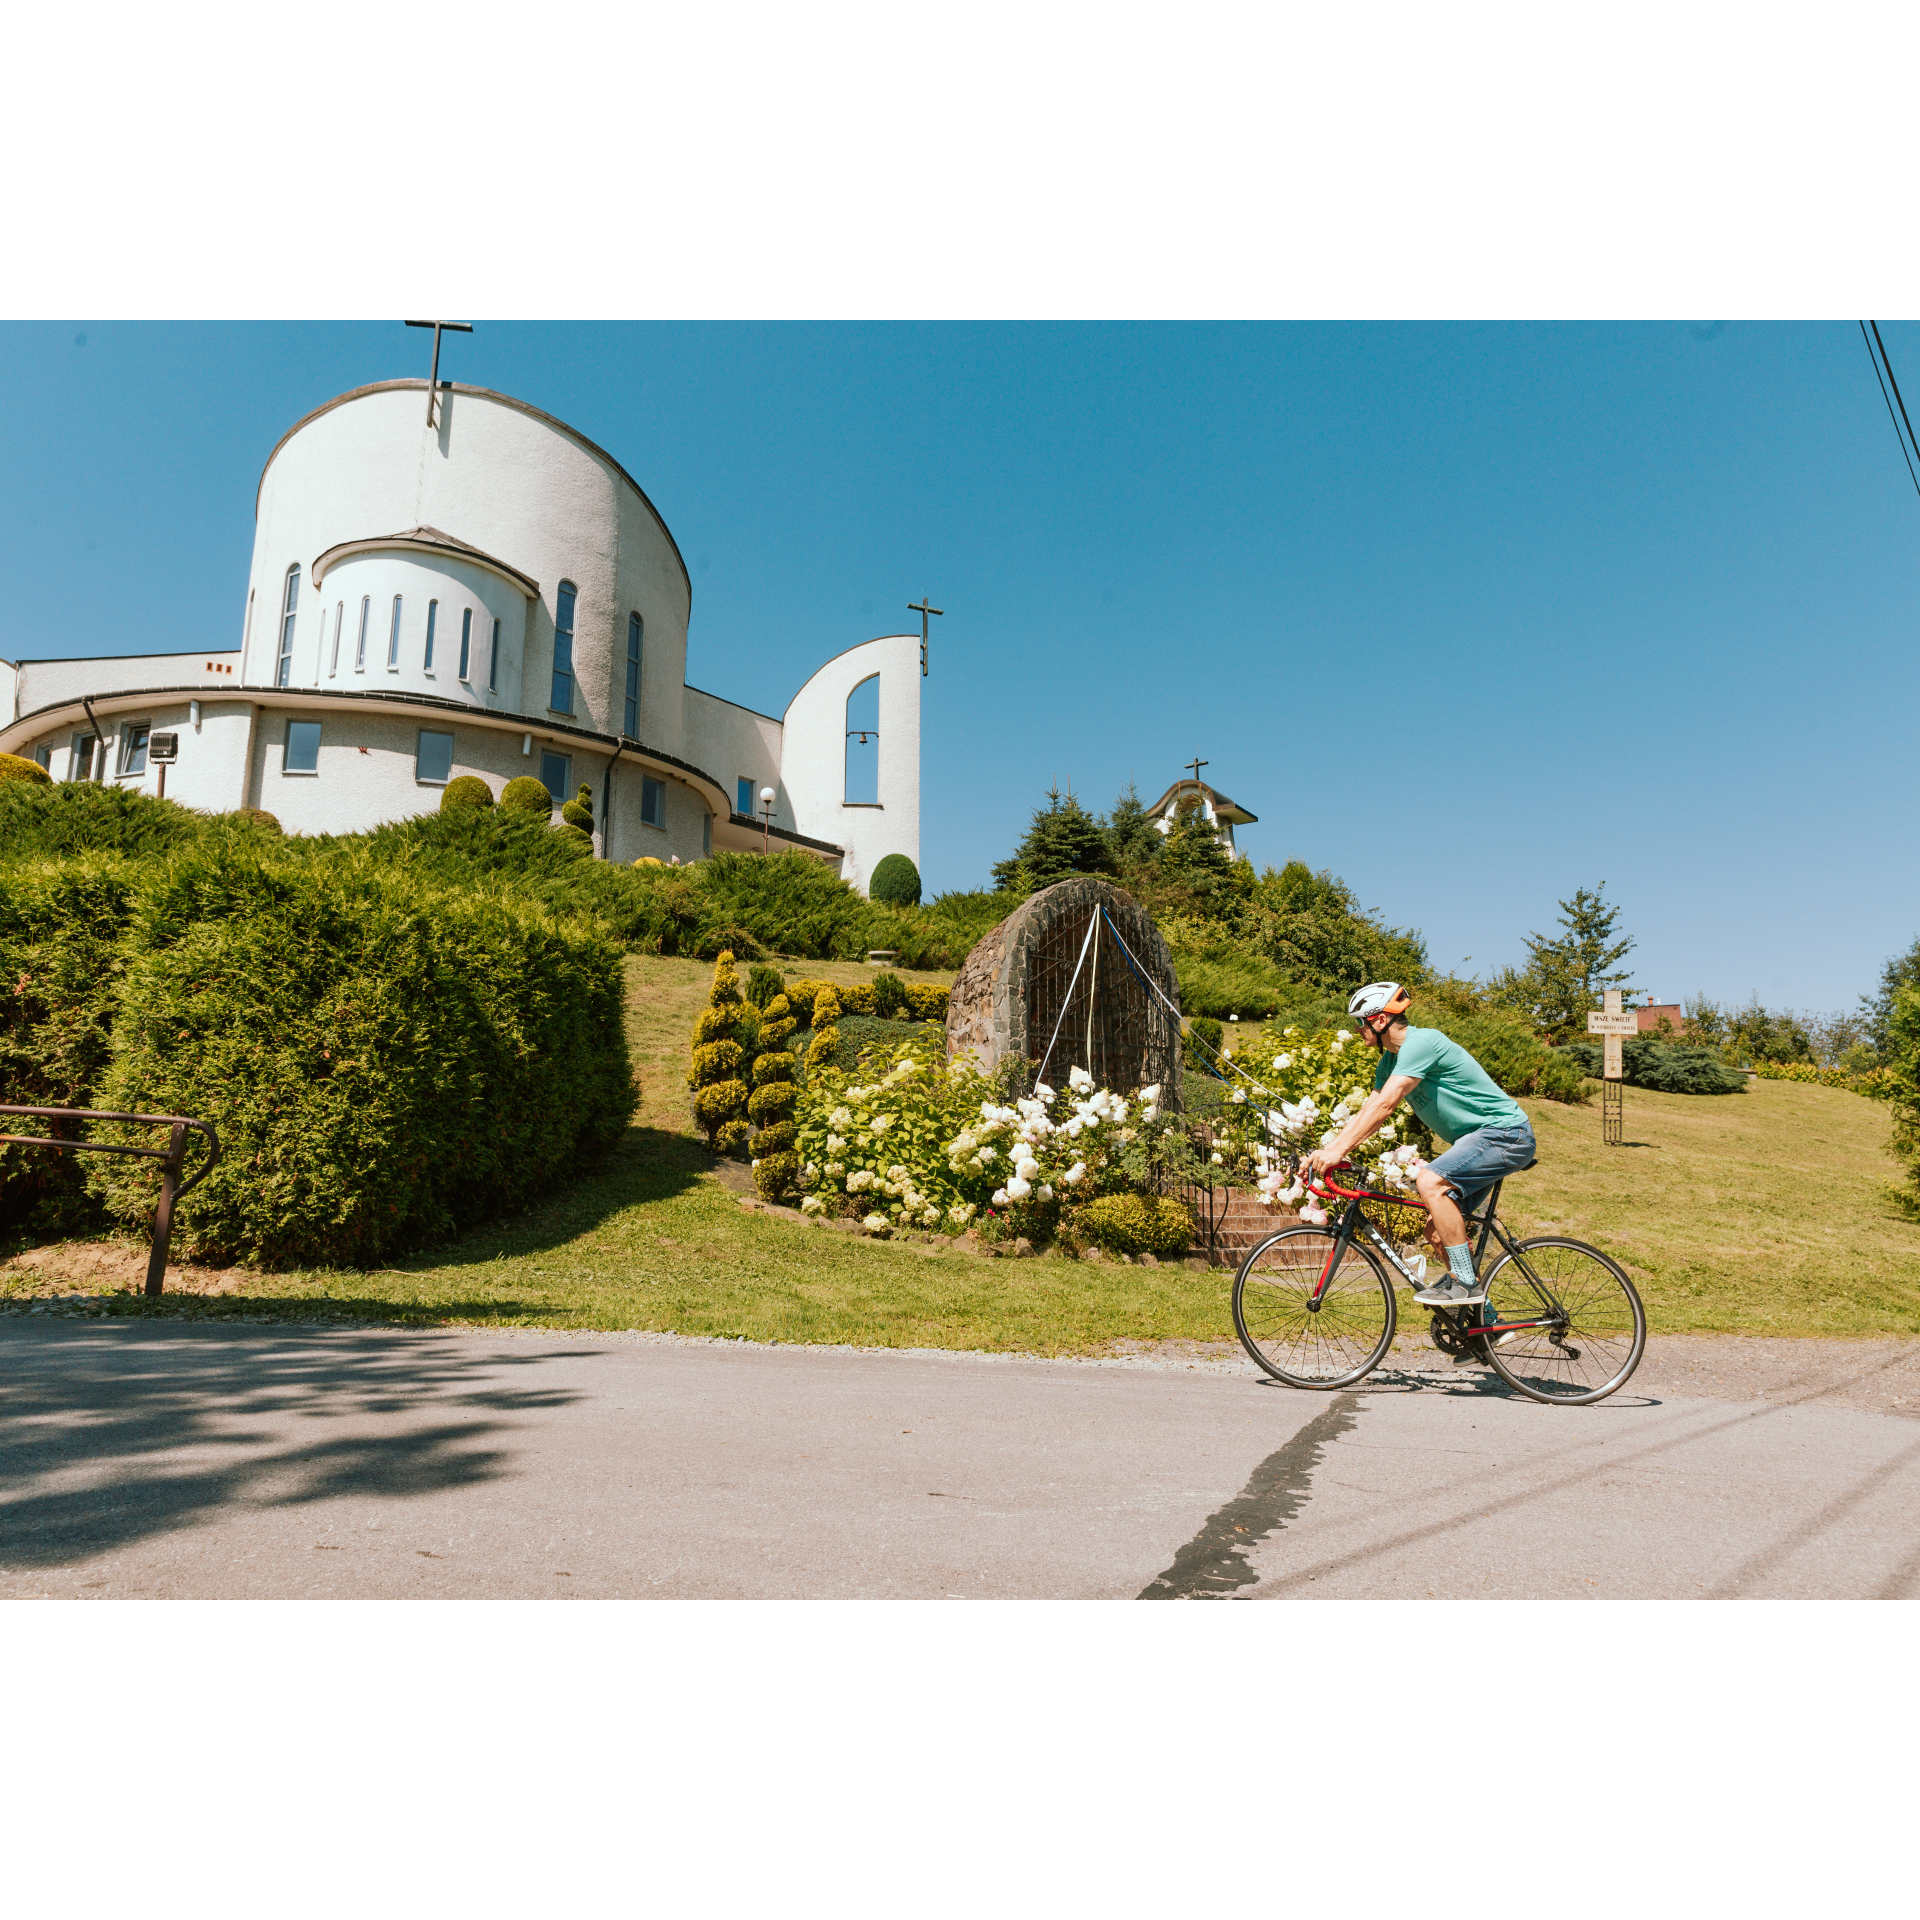 In the foreground, a cyclist wearing a helmet riding on an asphalt street, in the background, on a hill, a white church building with a round facade, green vegetation and a chapel around